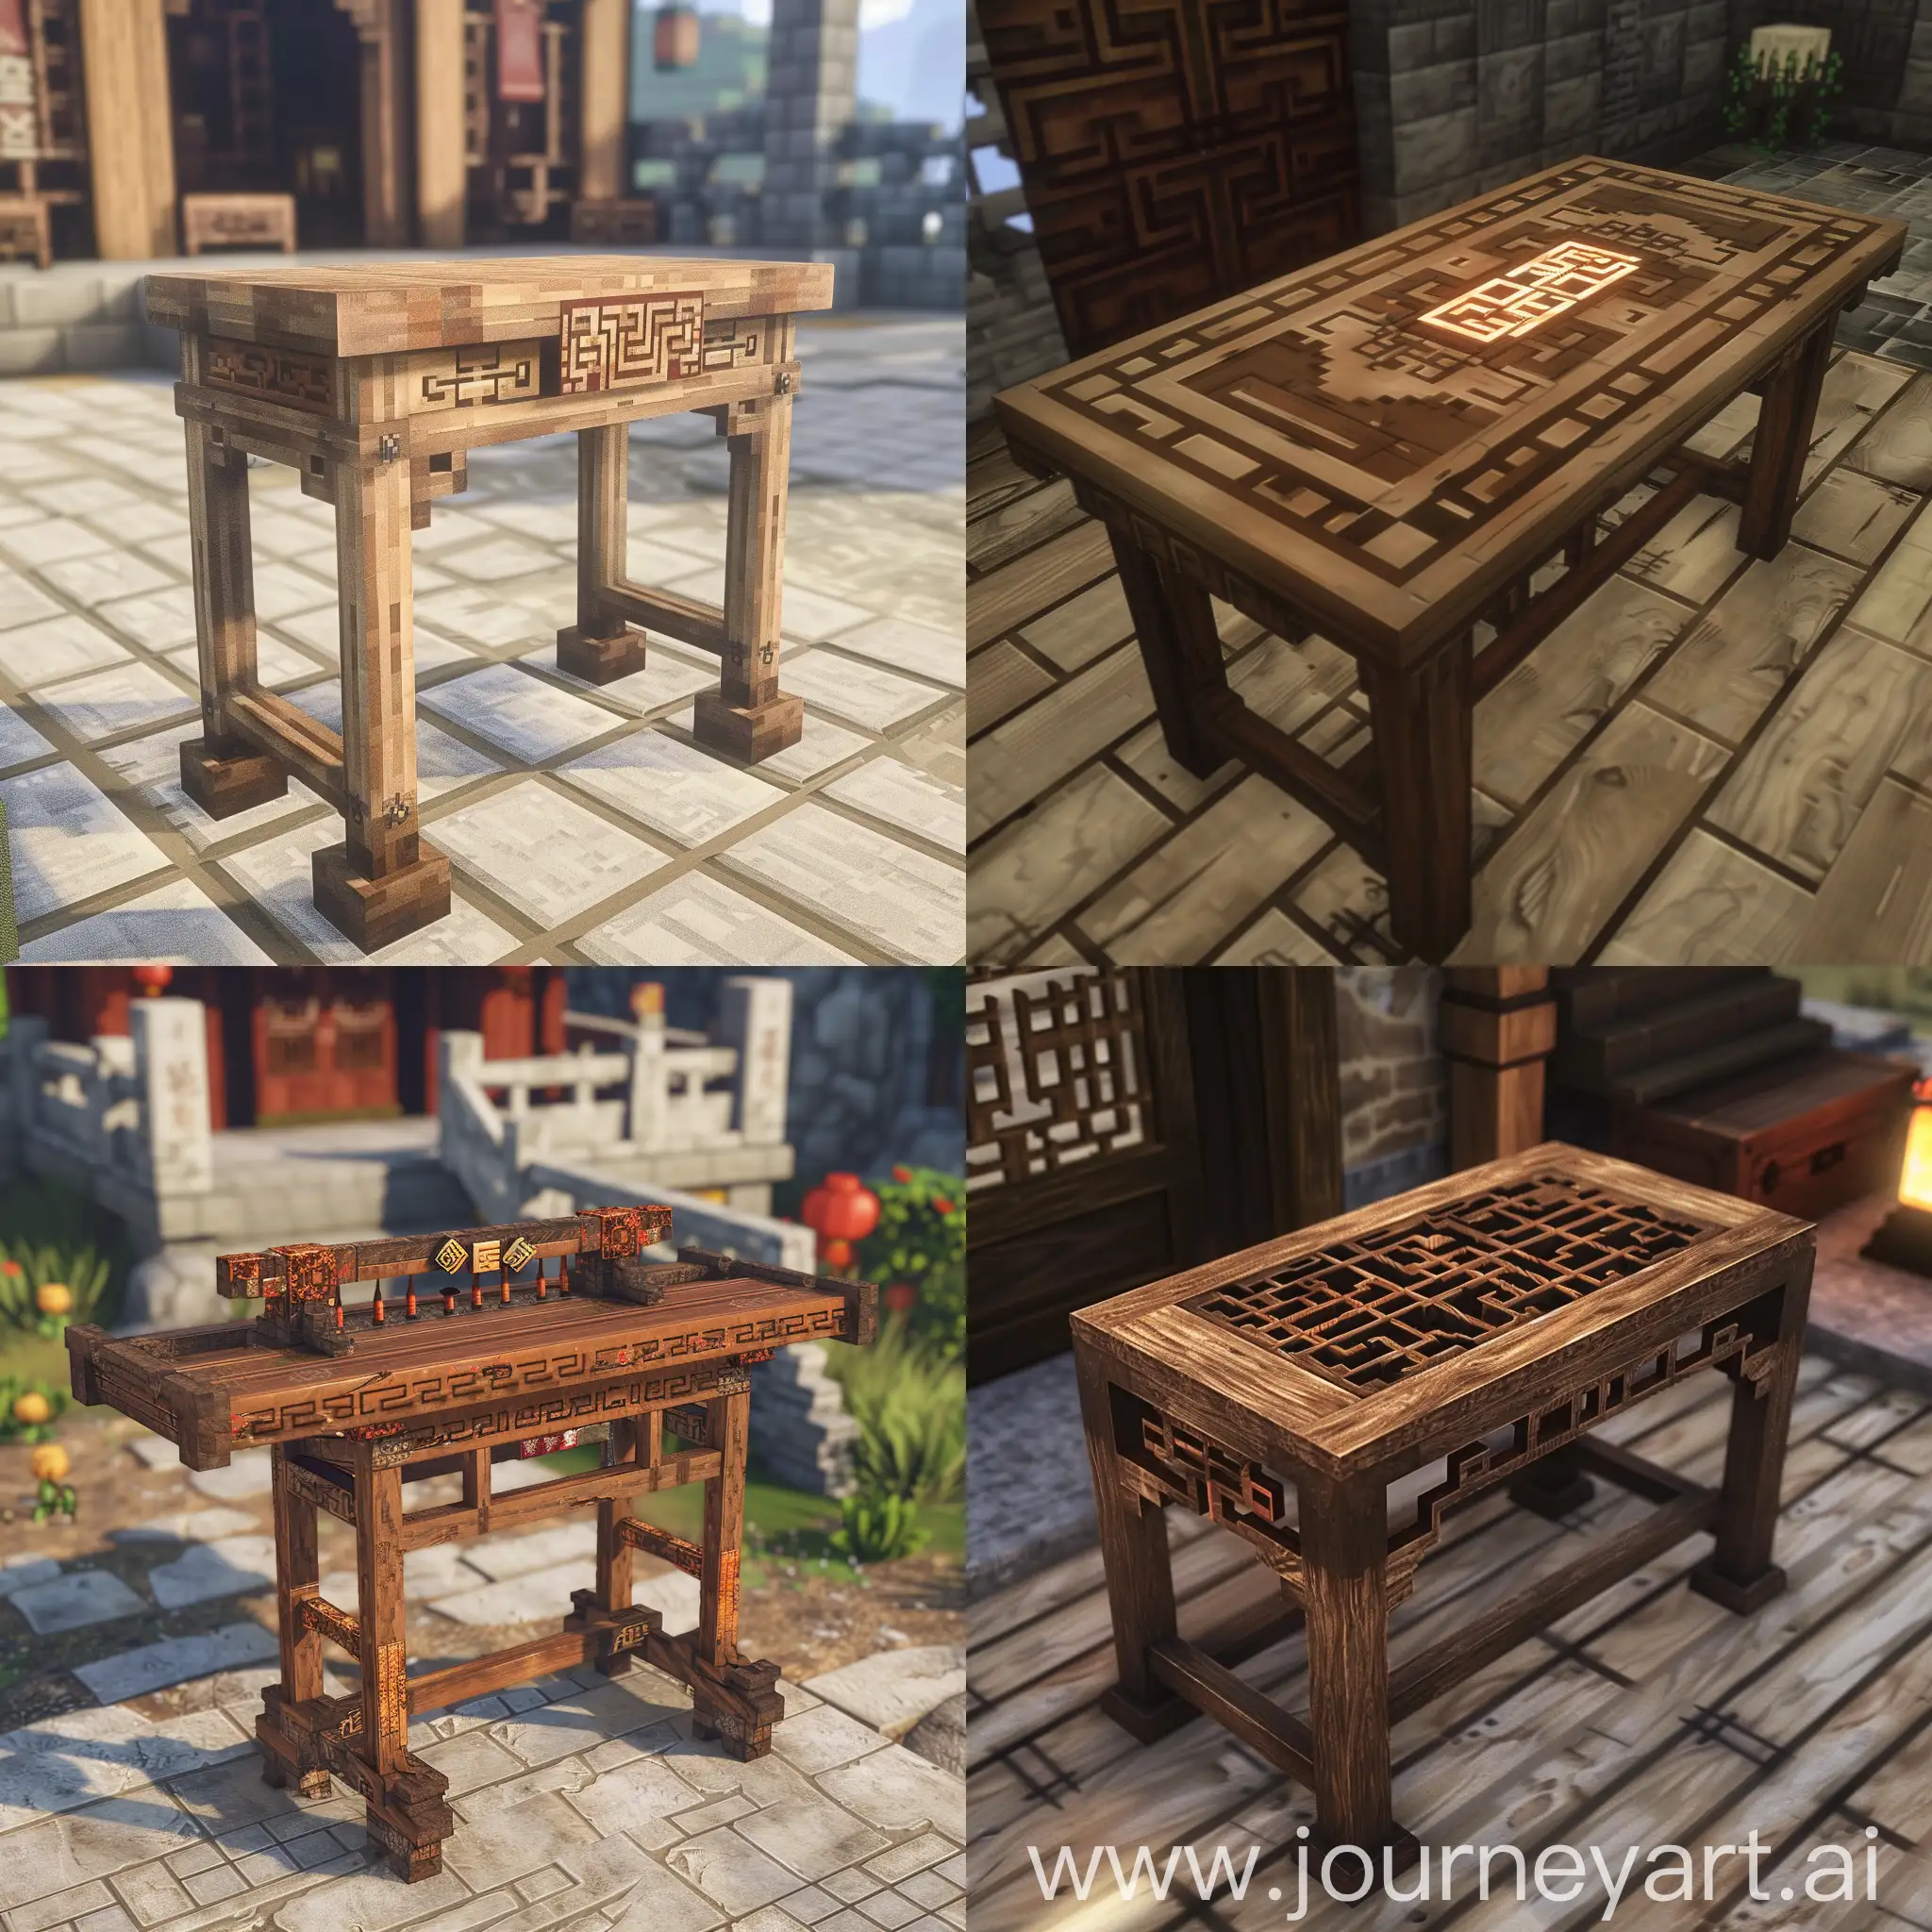 Traditional-Chinese-Fletching-Table-in-Minecraft-Setting